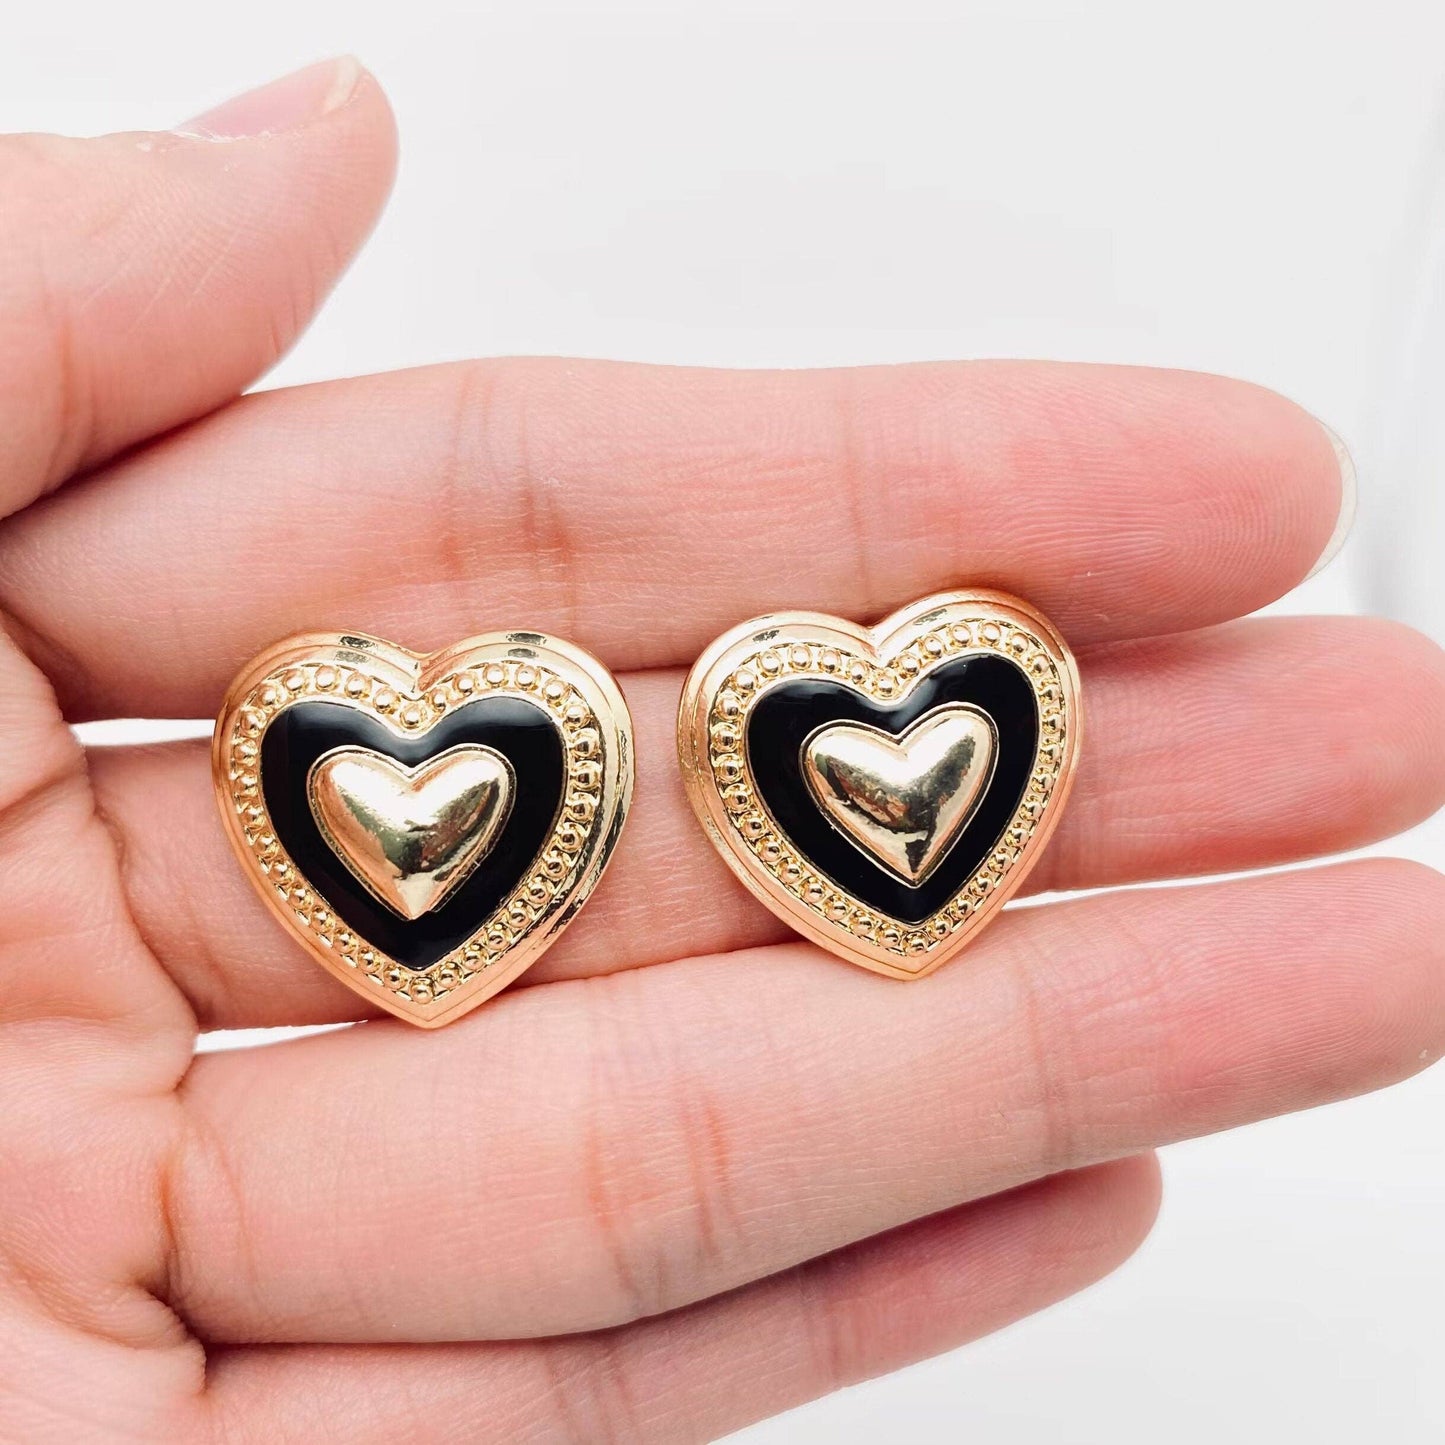 Black and Gold Heart Shaped Vintage Studs